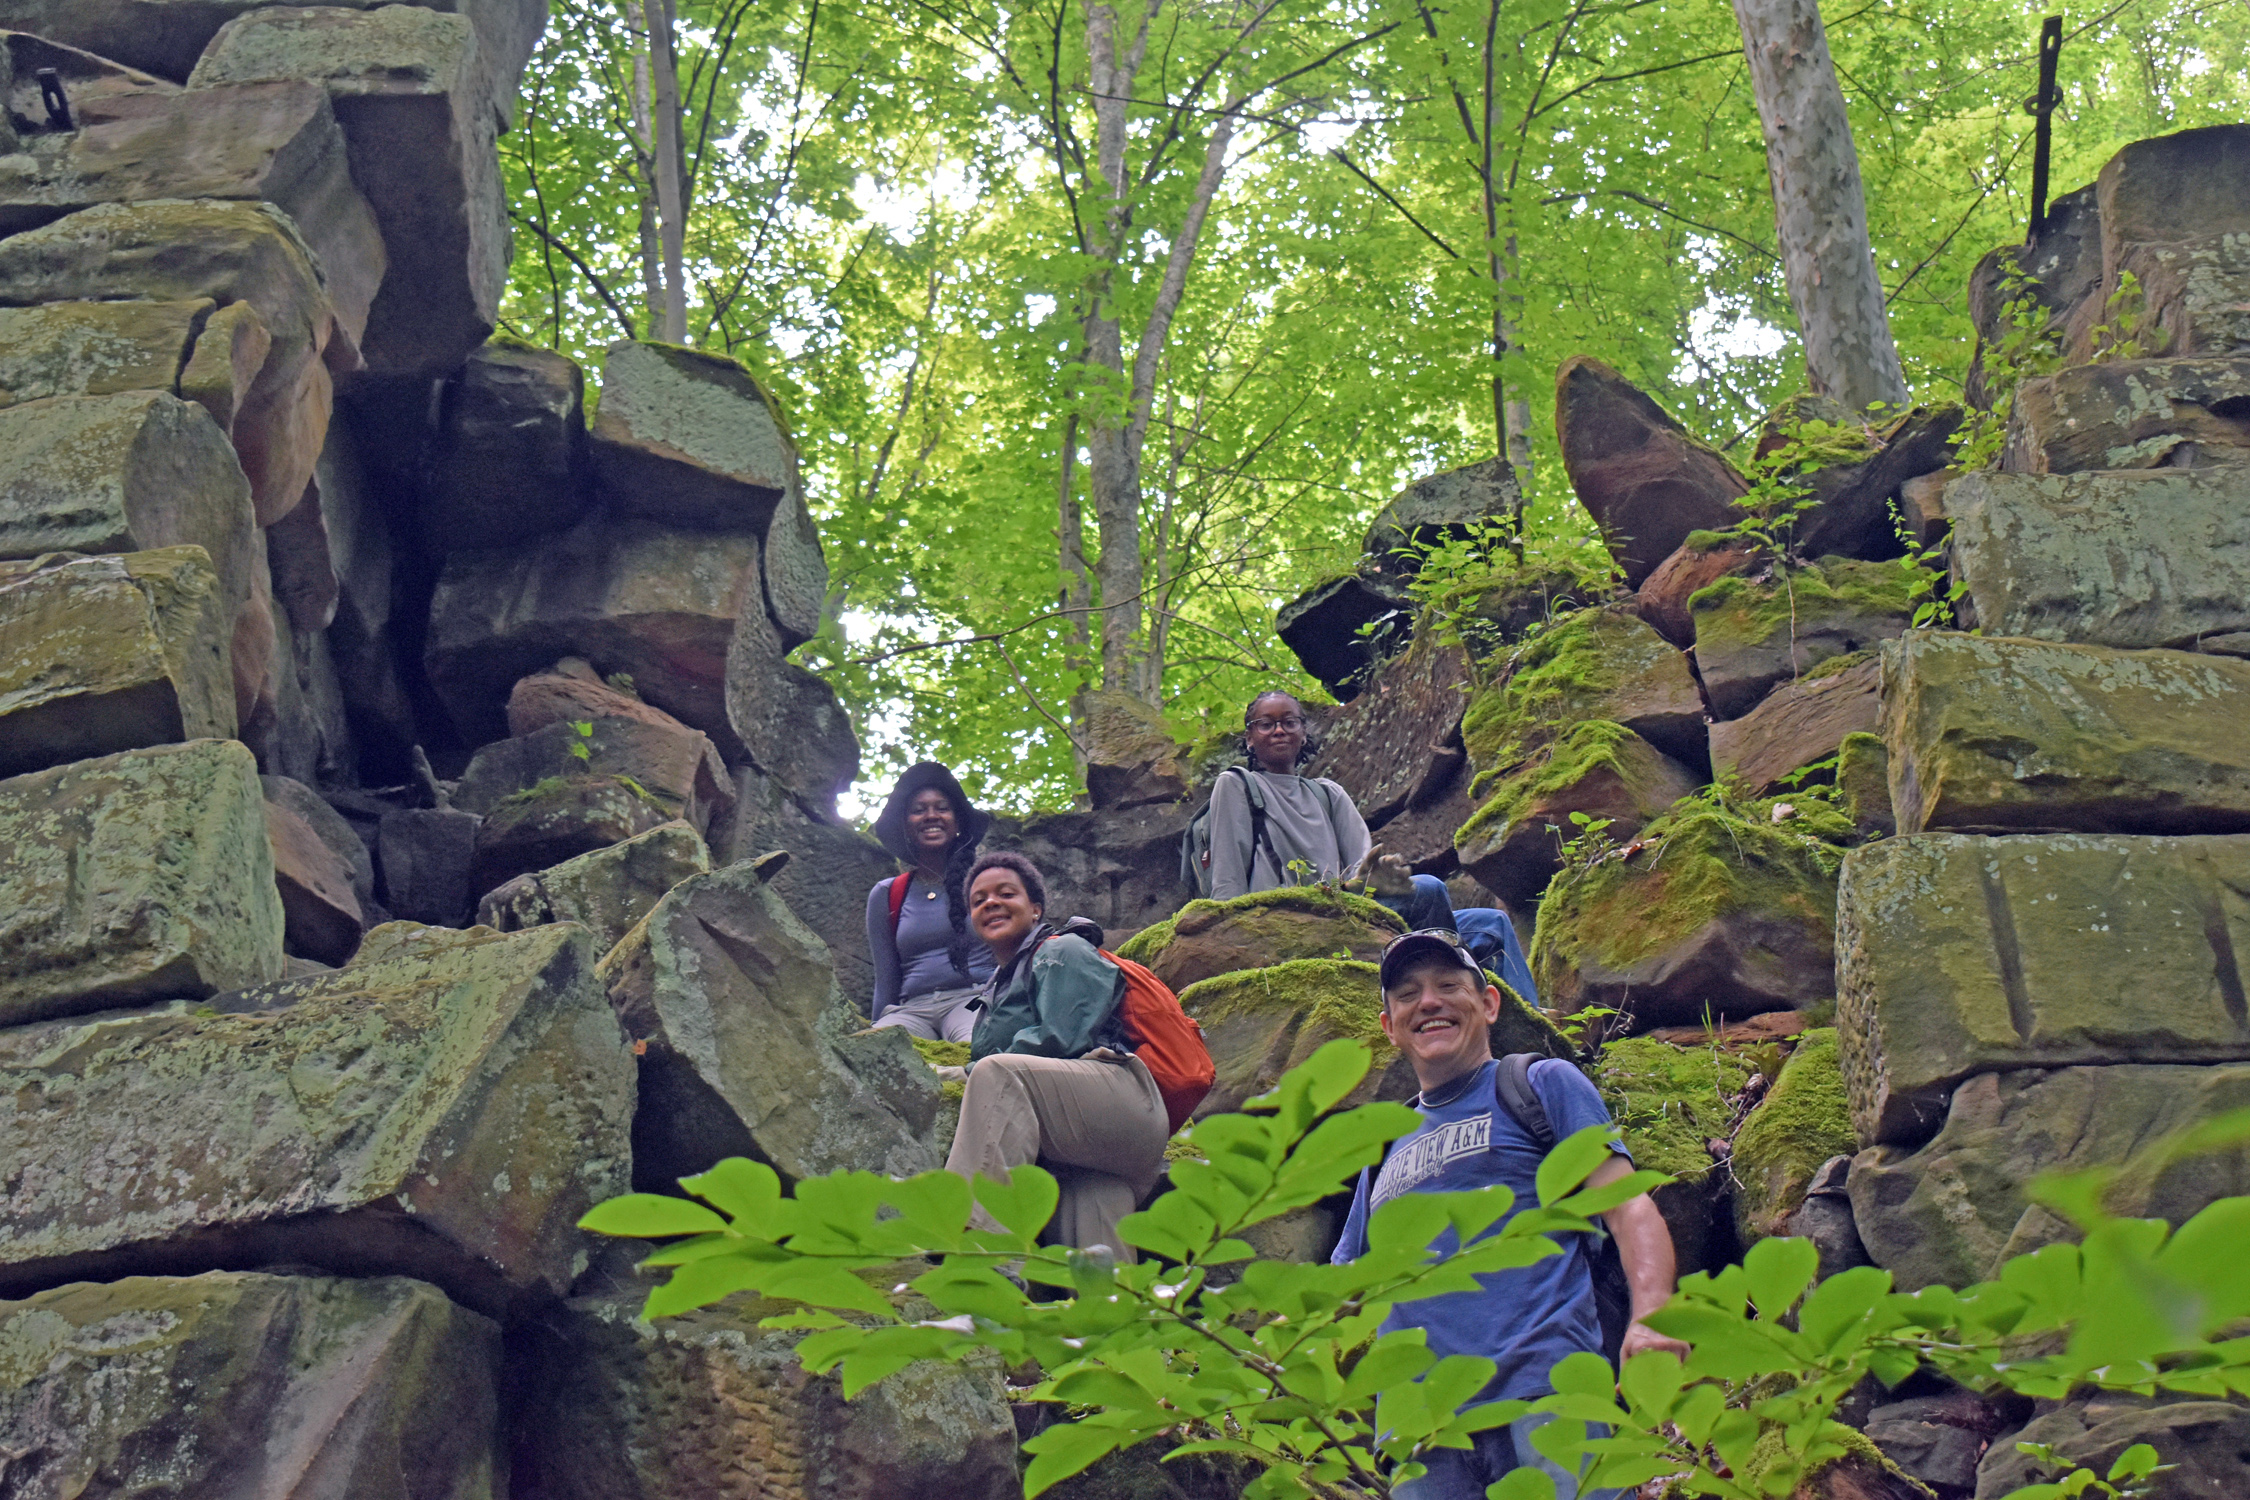 The students hiked to the Cambria Iron Furnace deep in the Wayne National Forest